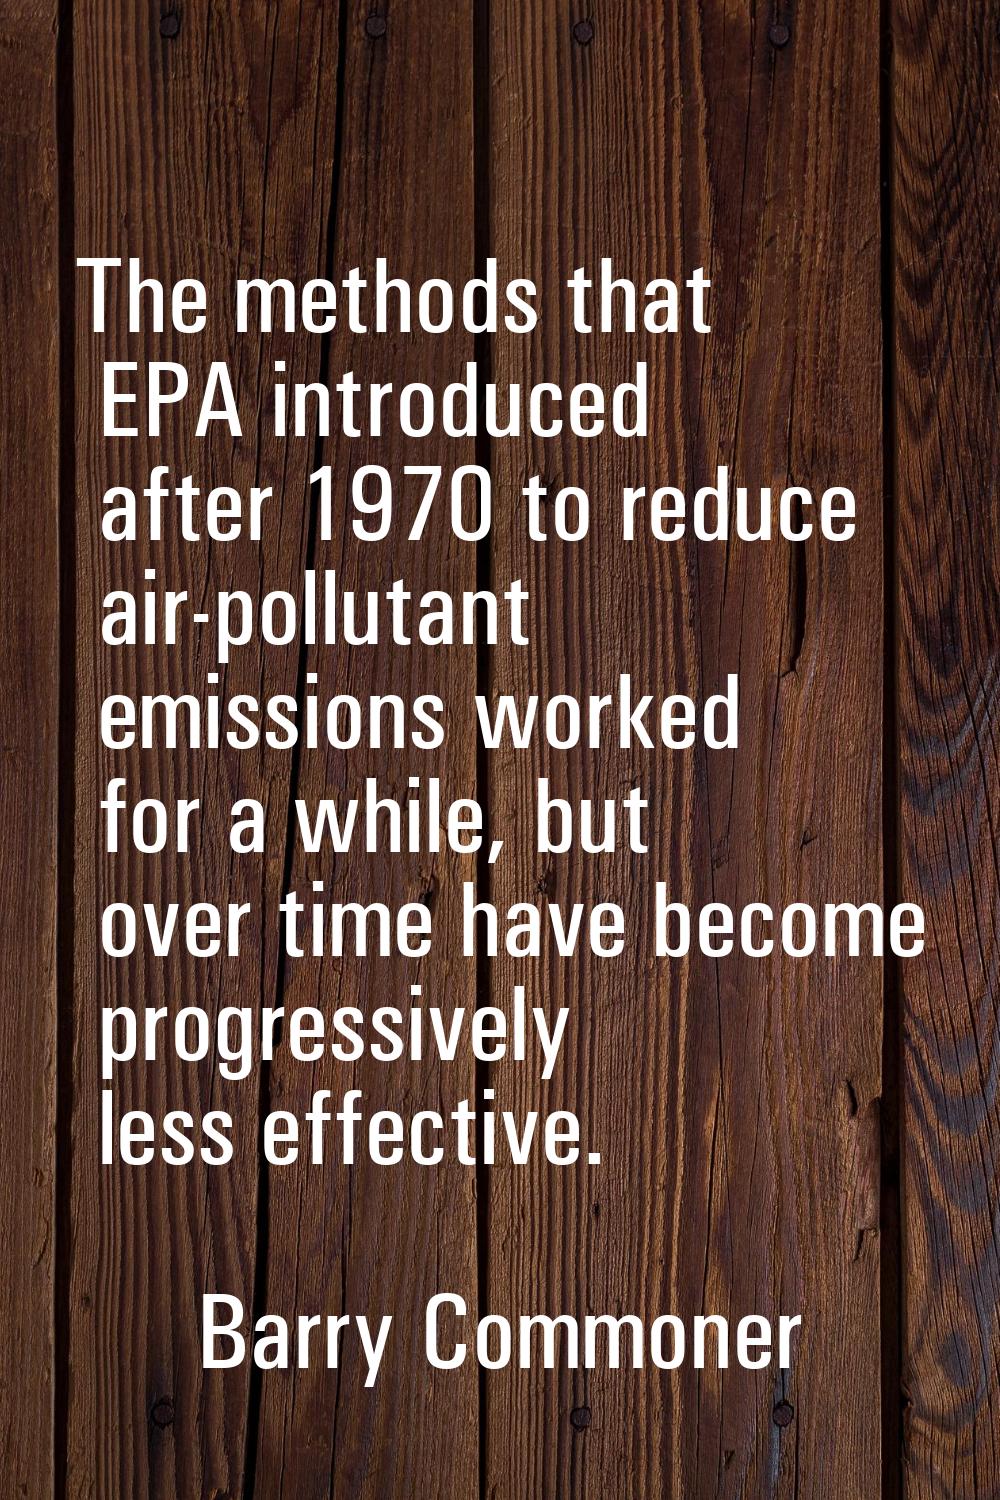 The methods that EPA introduced after 1970 to reduce air-pollutant emissions worked for a while, bu